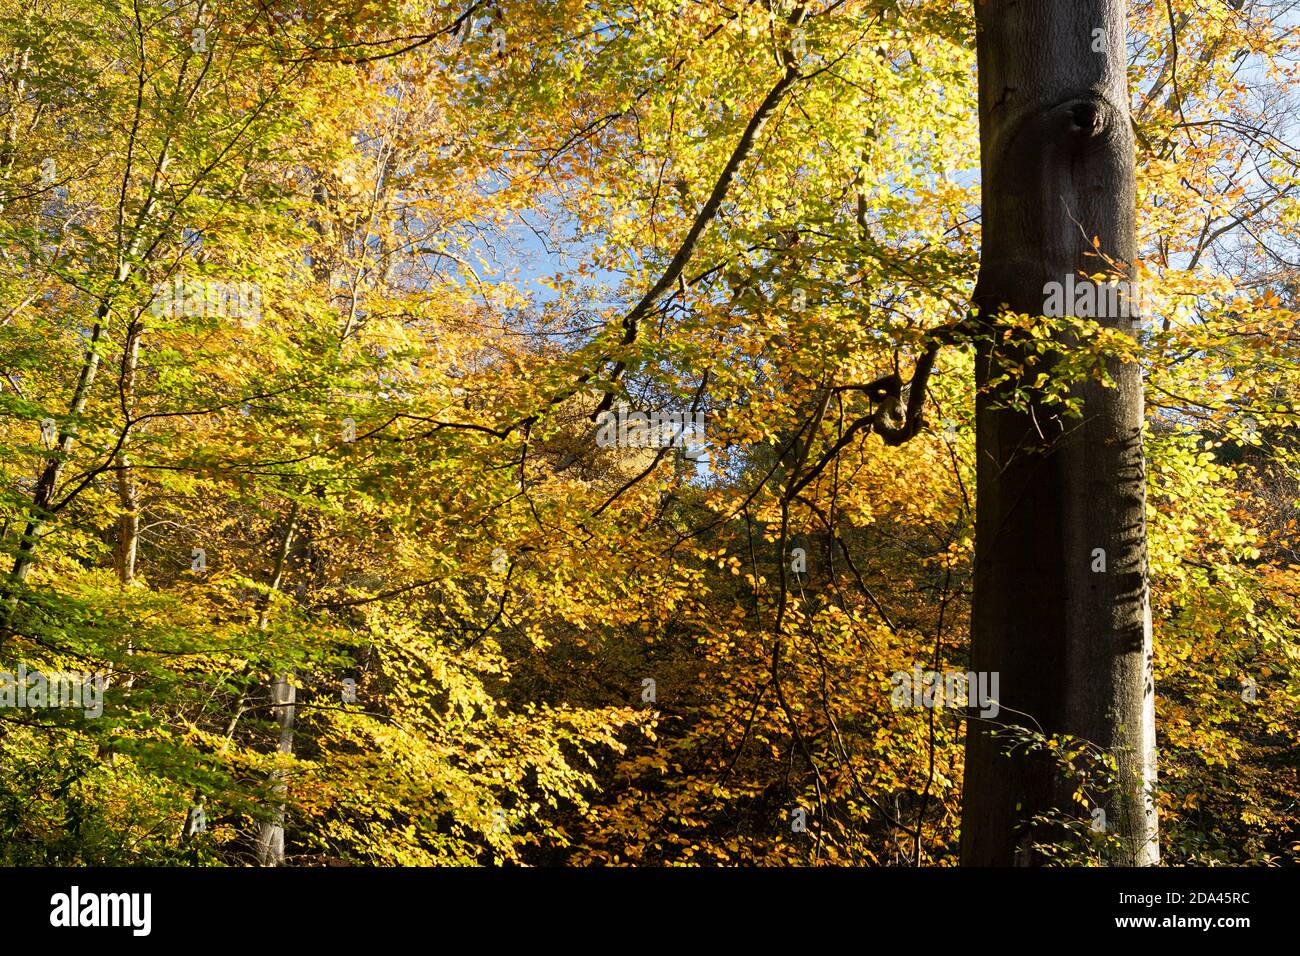 Autumn colours in woodland, golden and bronze coloured leaves on mature trees, UK Stock Photo